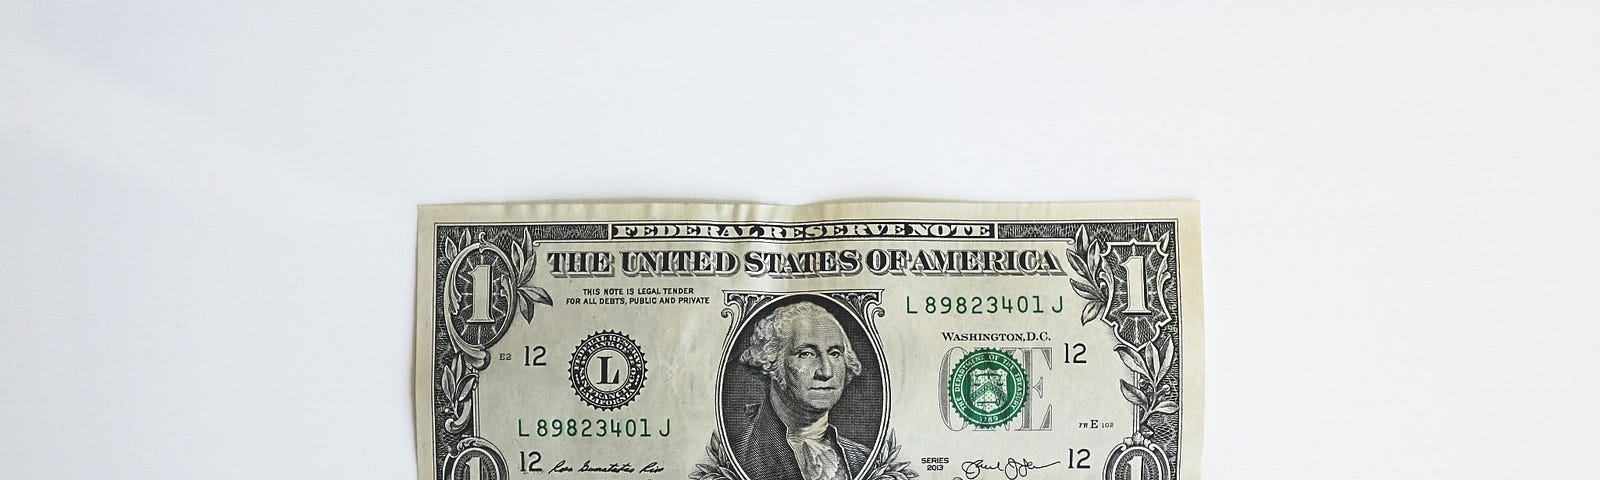 A white background with a $1 bill in the center.